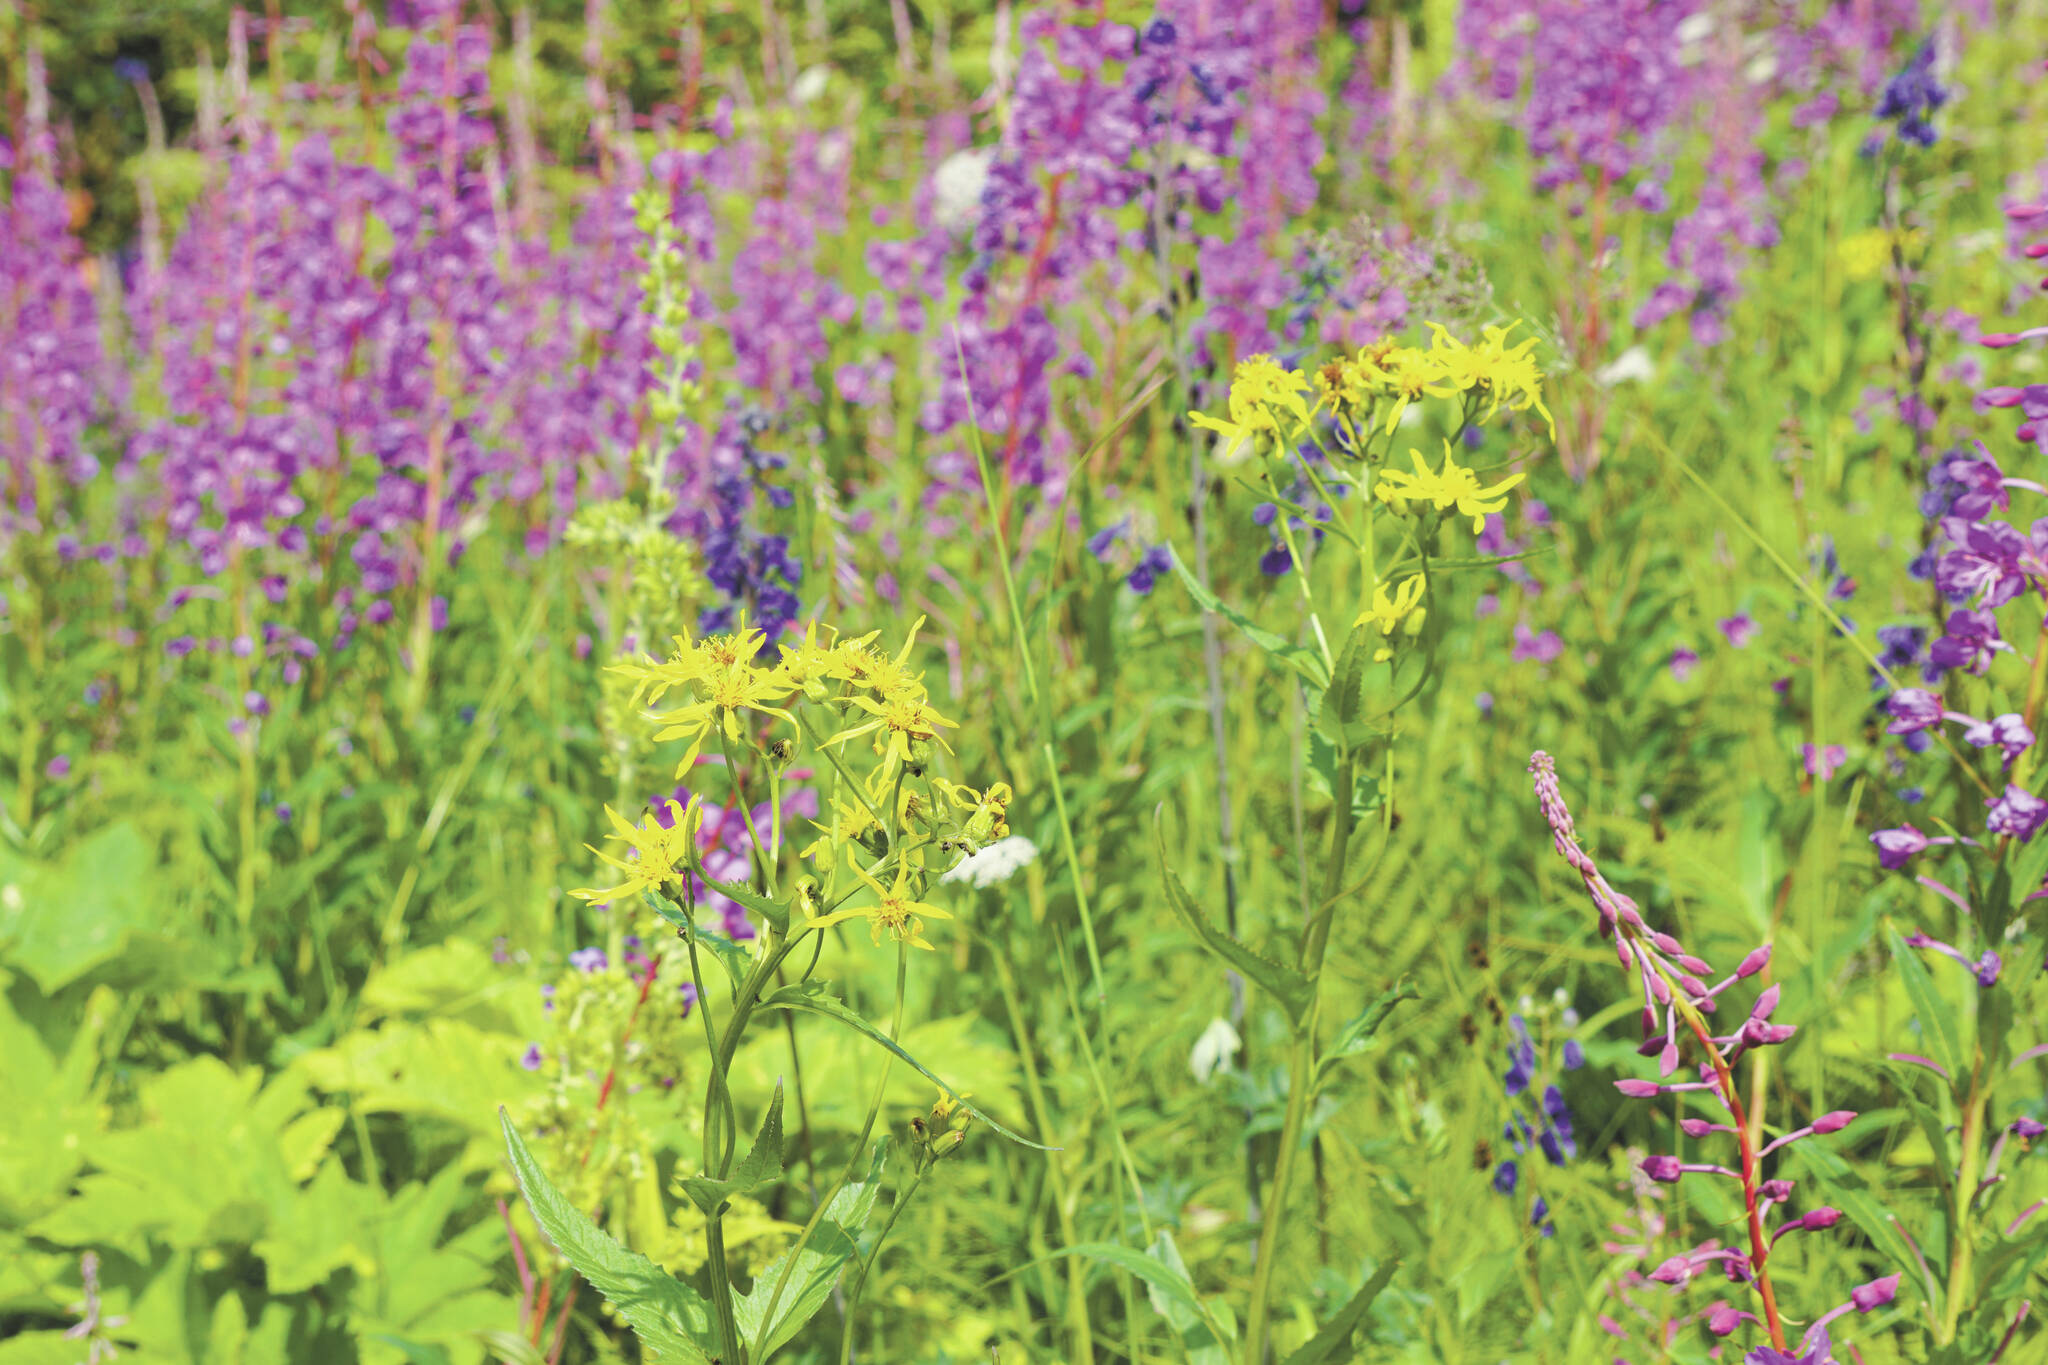 Photos by Michael Armstrong/Homer News
Summer daze
TOP: Wildflowers bloom along the Eveline Trail on Saturday, July 23, in the Eveline State Recreation Area near Mile 14 East End Road, Fritz Creek.